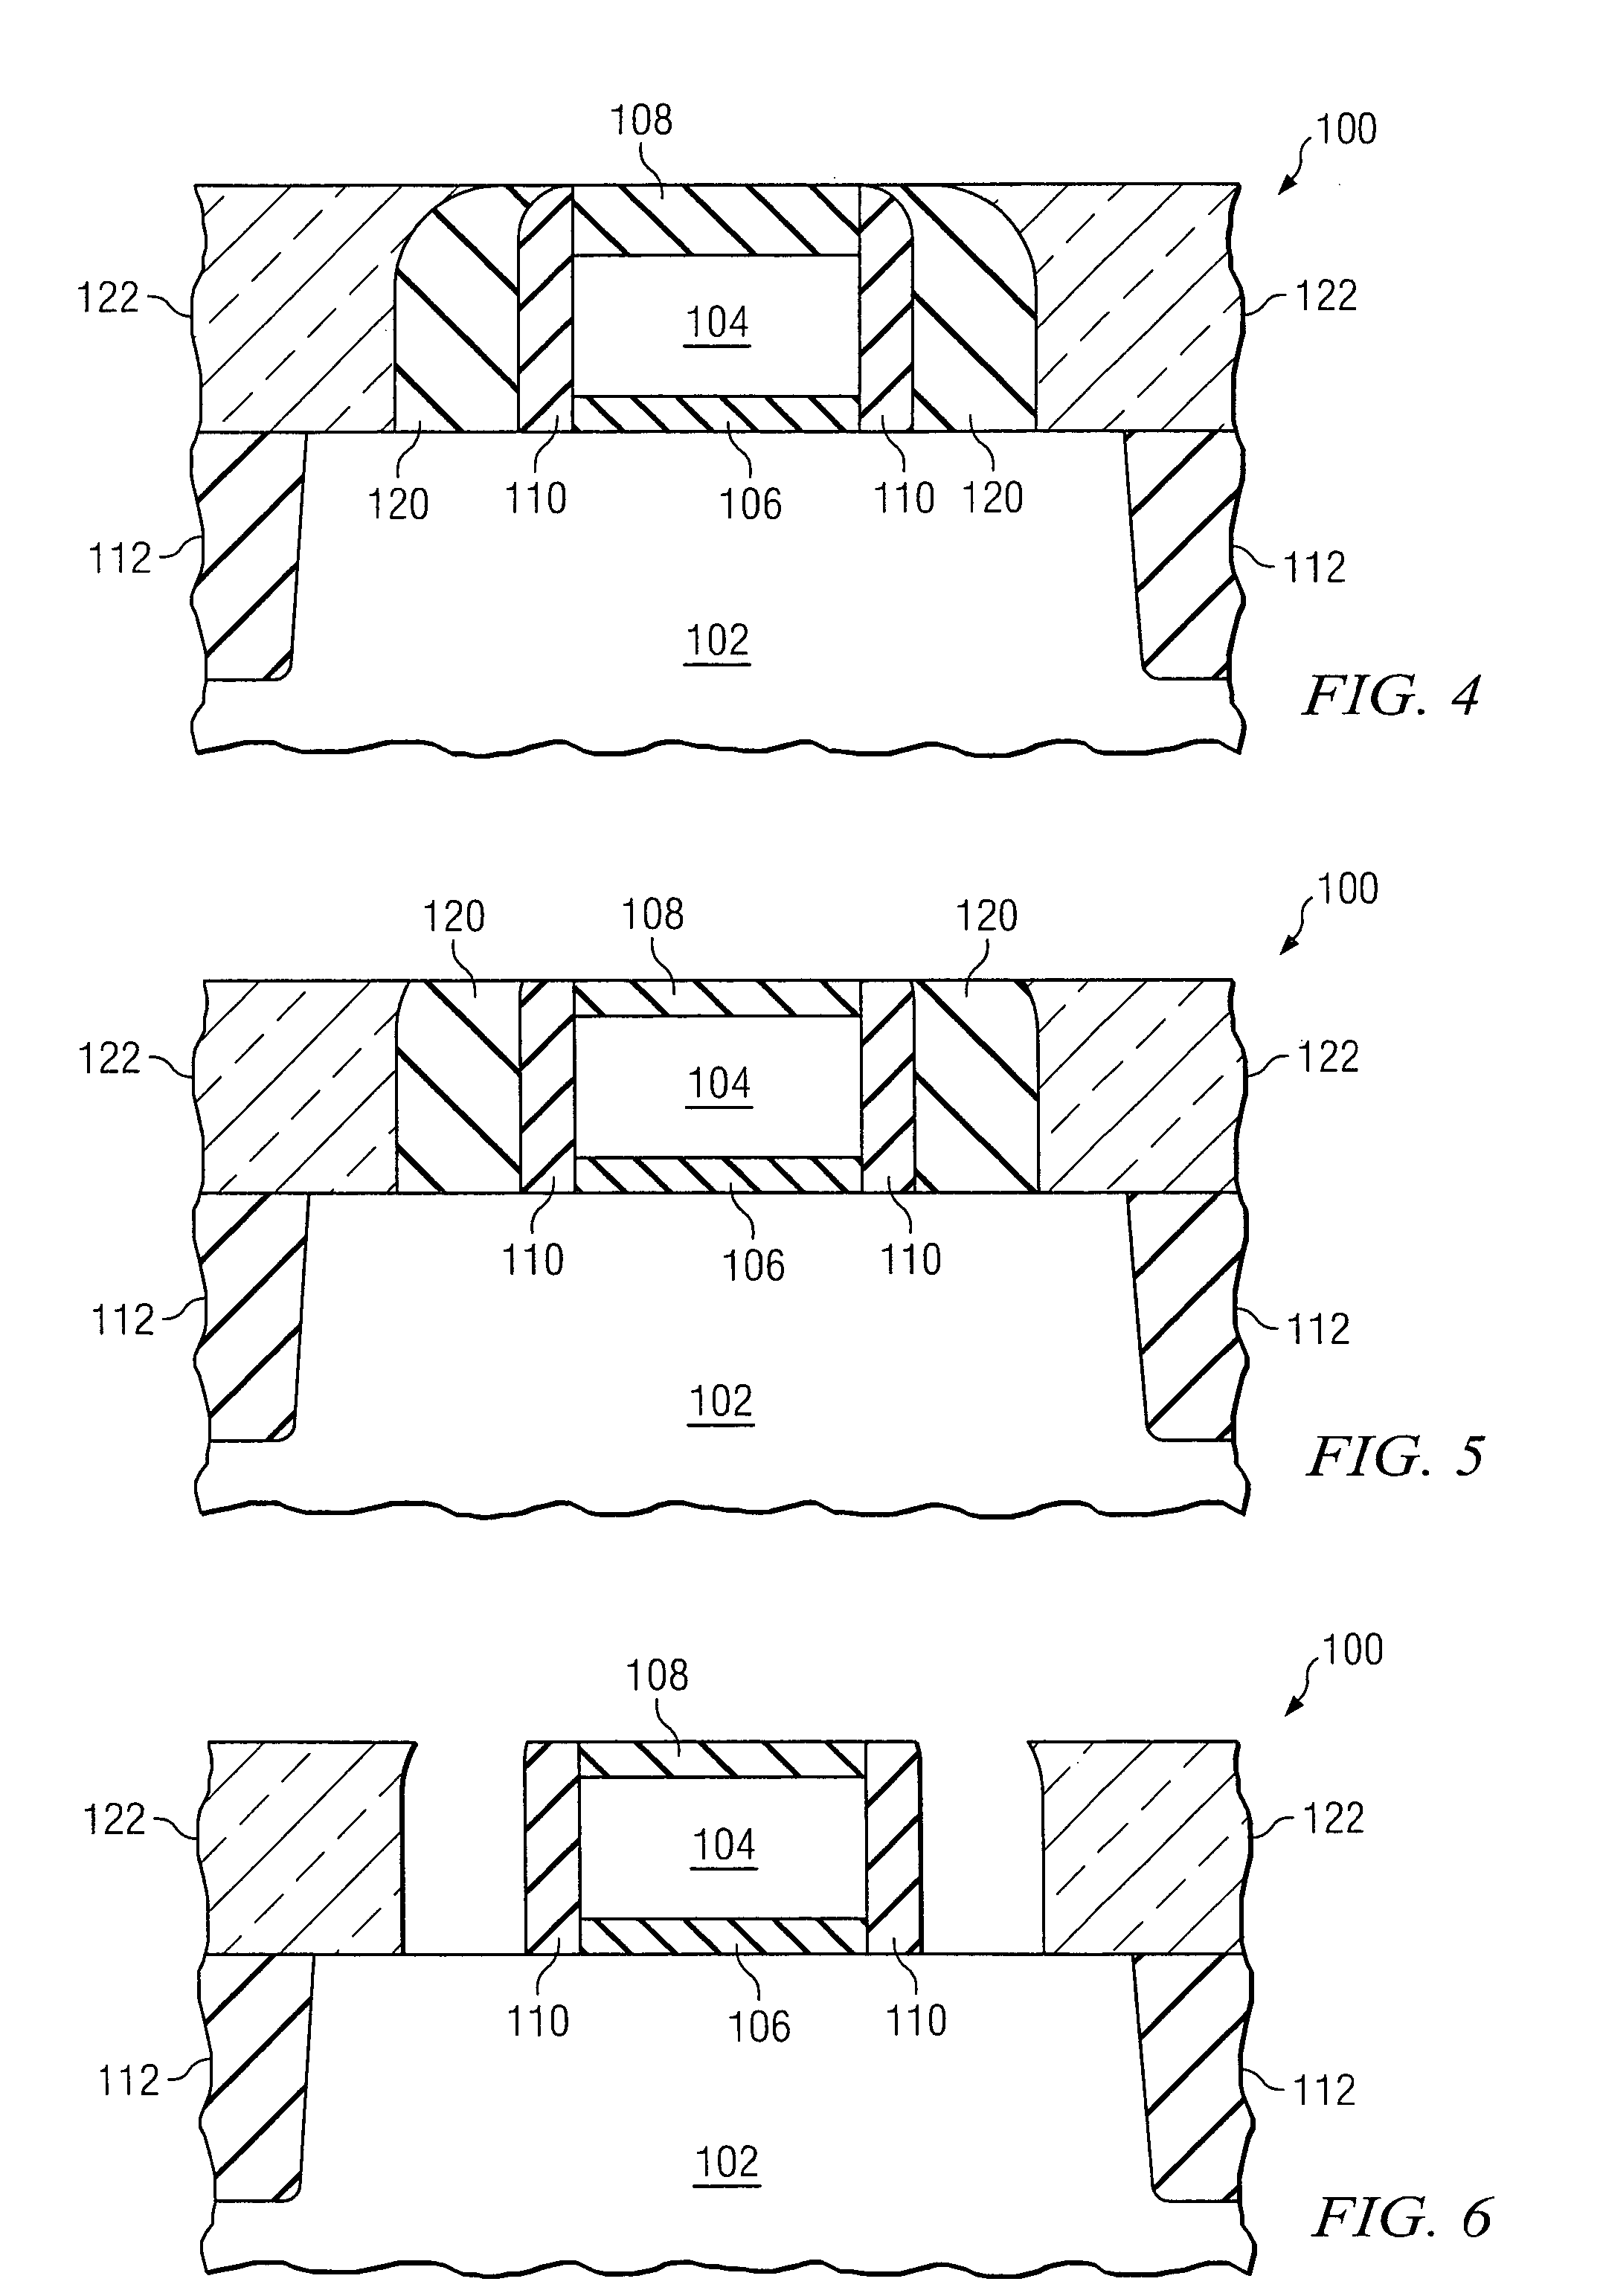 Strained semiconductor device and method of making the same